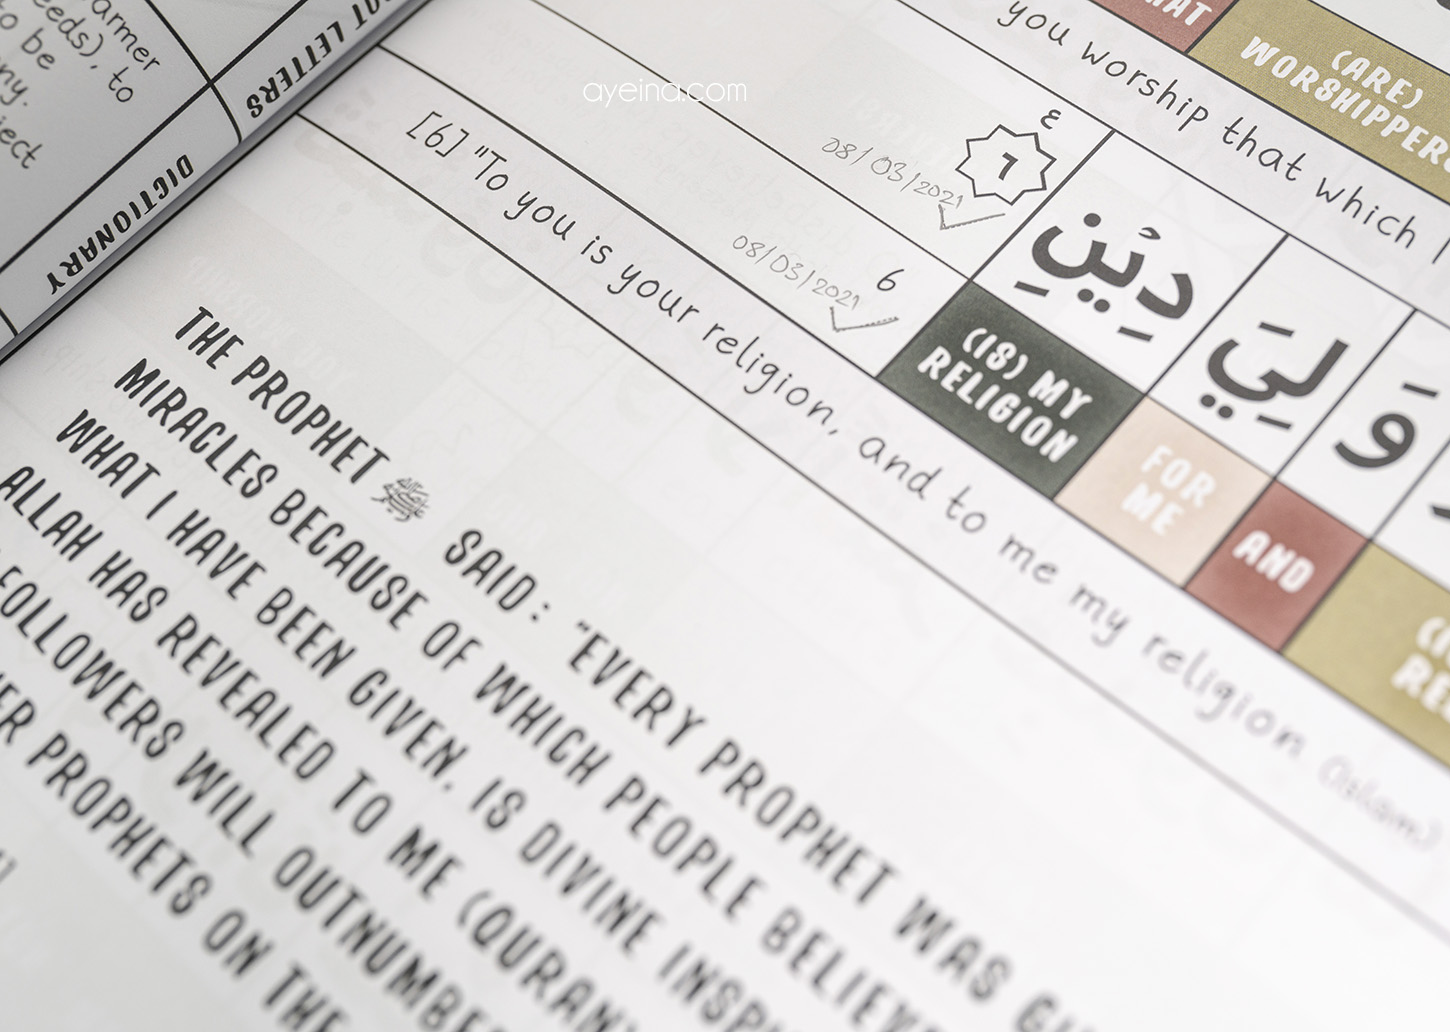 It's Never Too Late: Learning Quran and Arabic for Adults – Arabic School